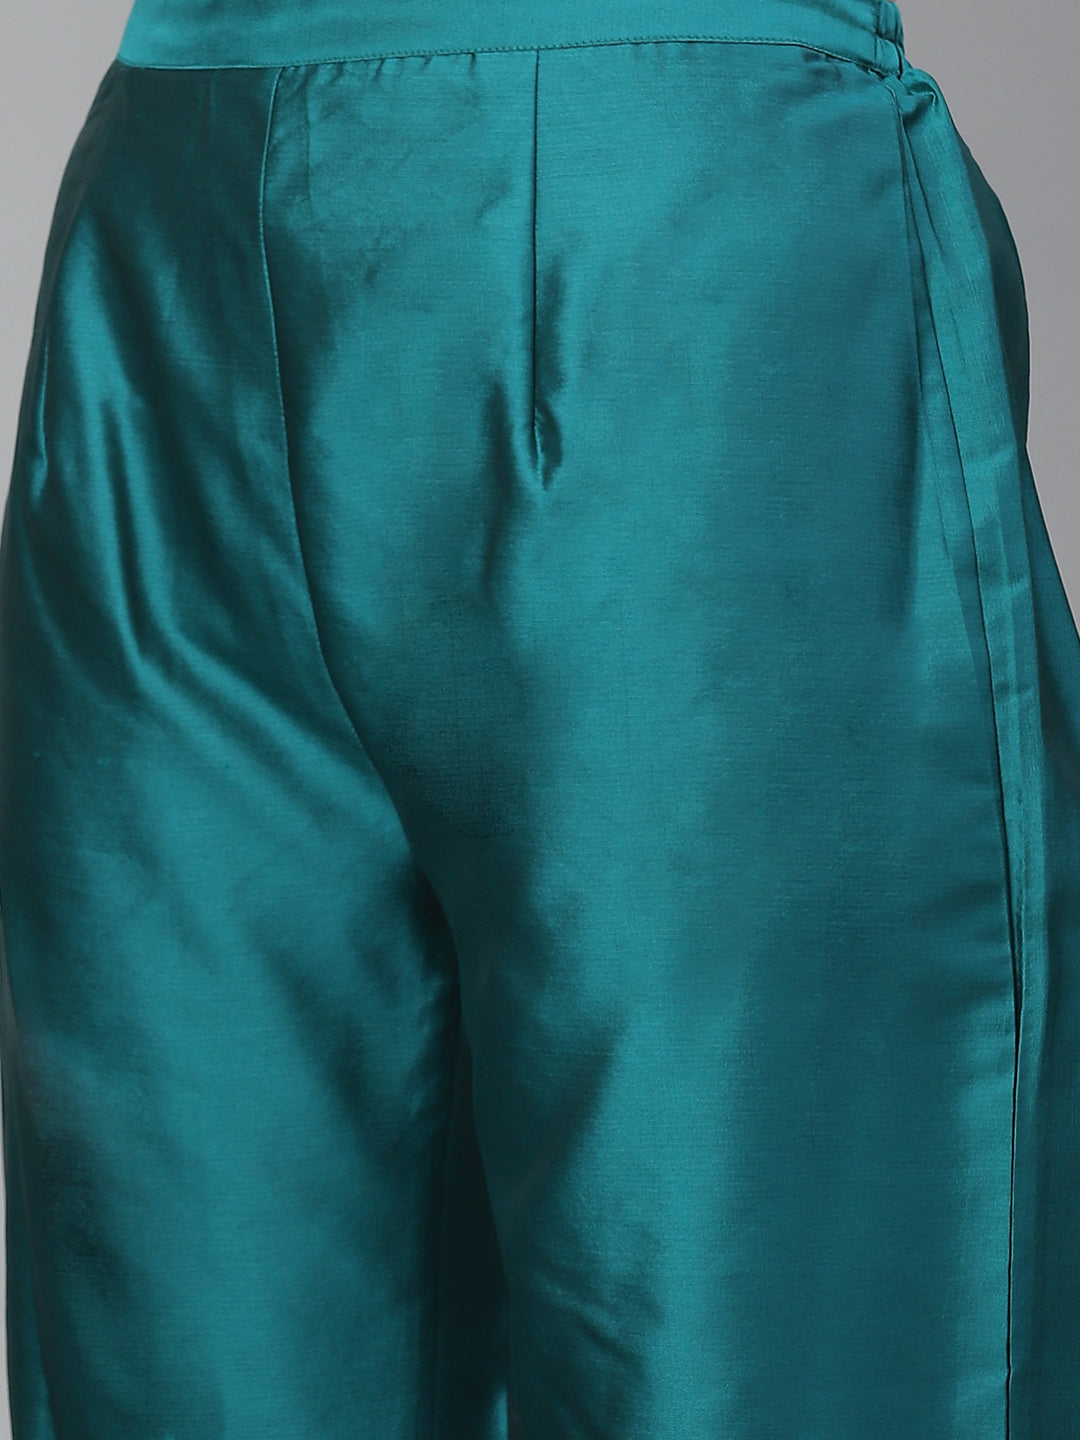 Teal green and golden woven design kurta with palazzos